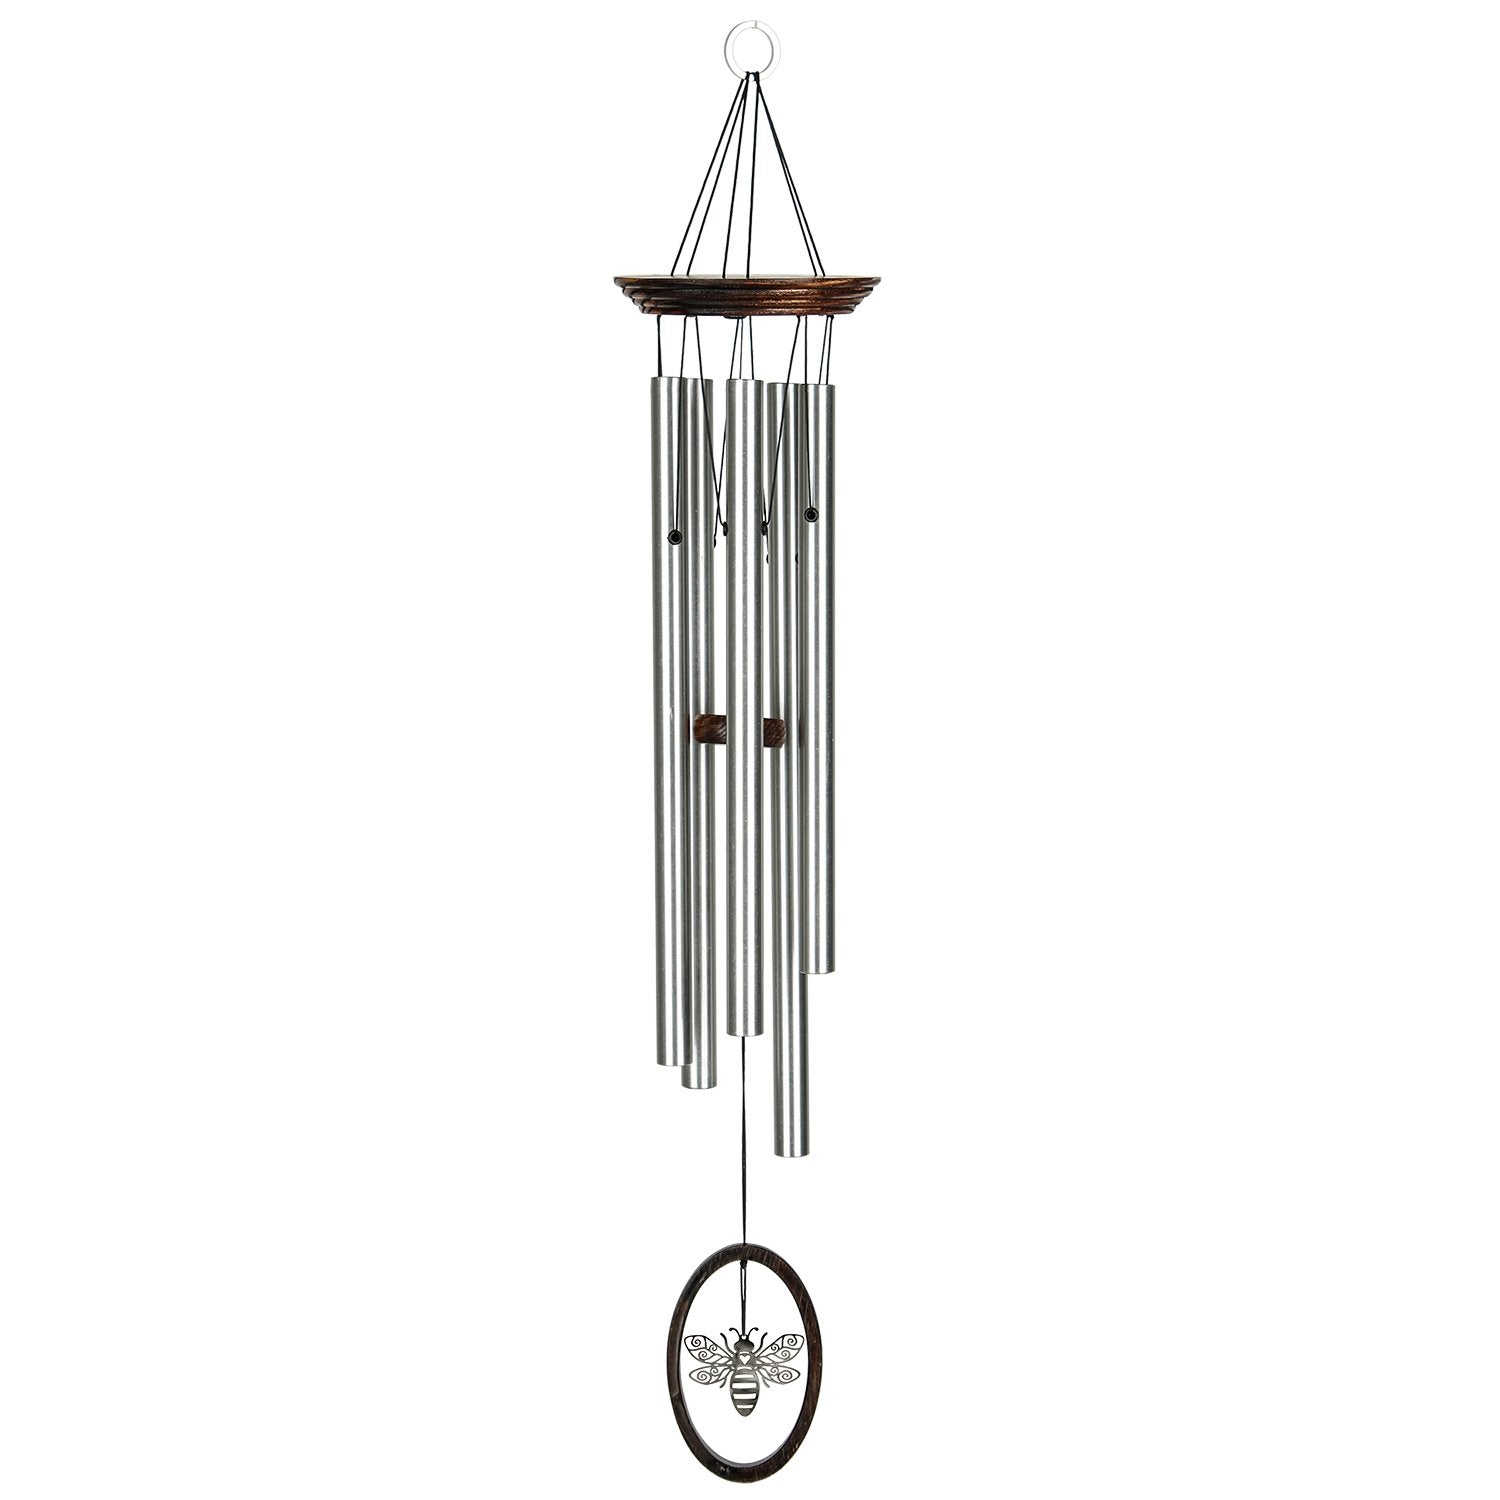 Wind Fantasy Chime - Bumble Bee full product image